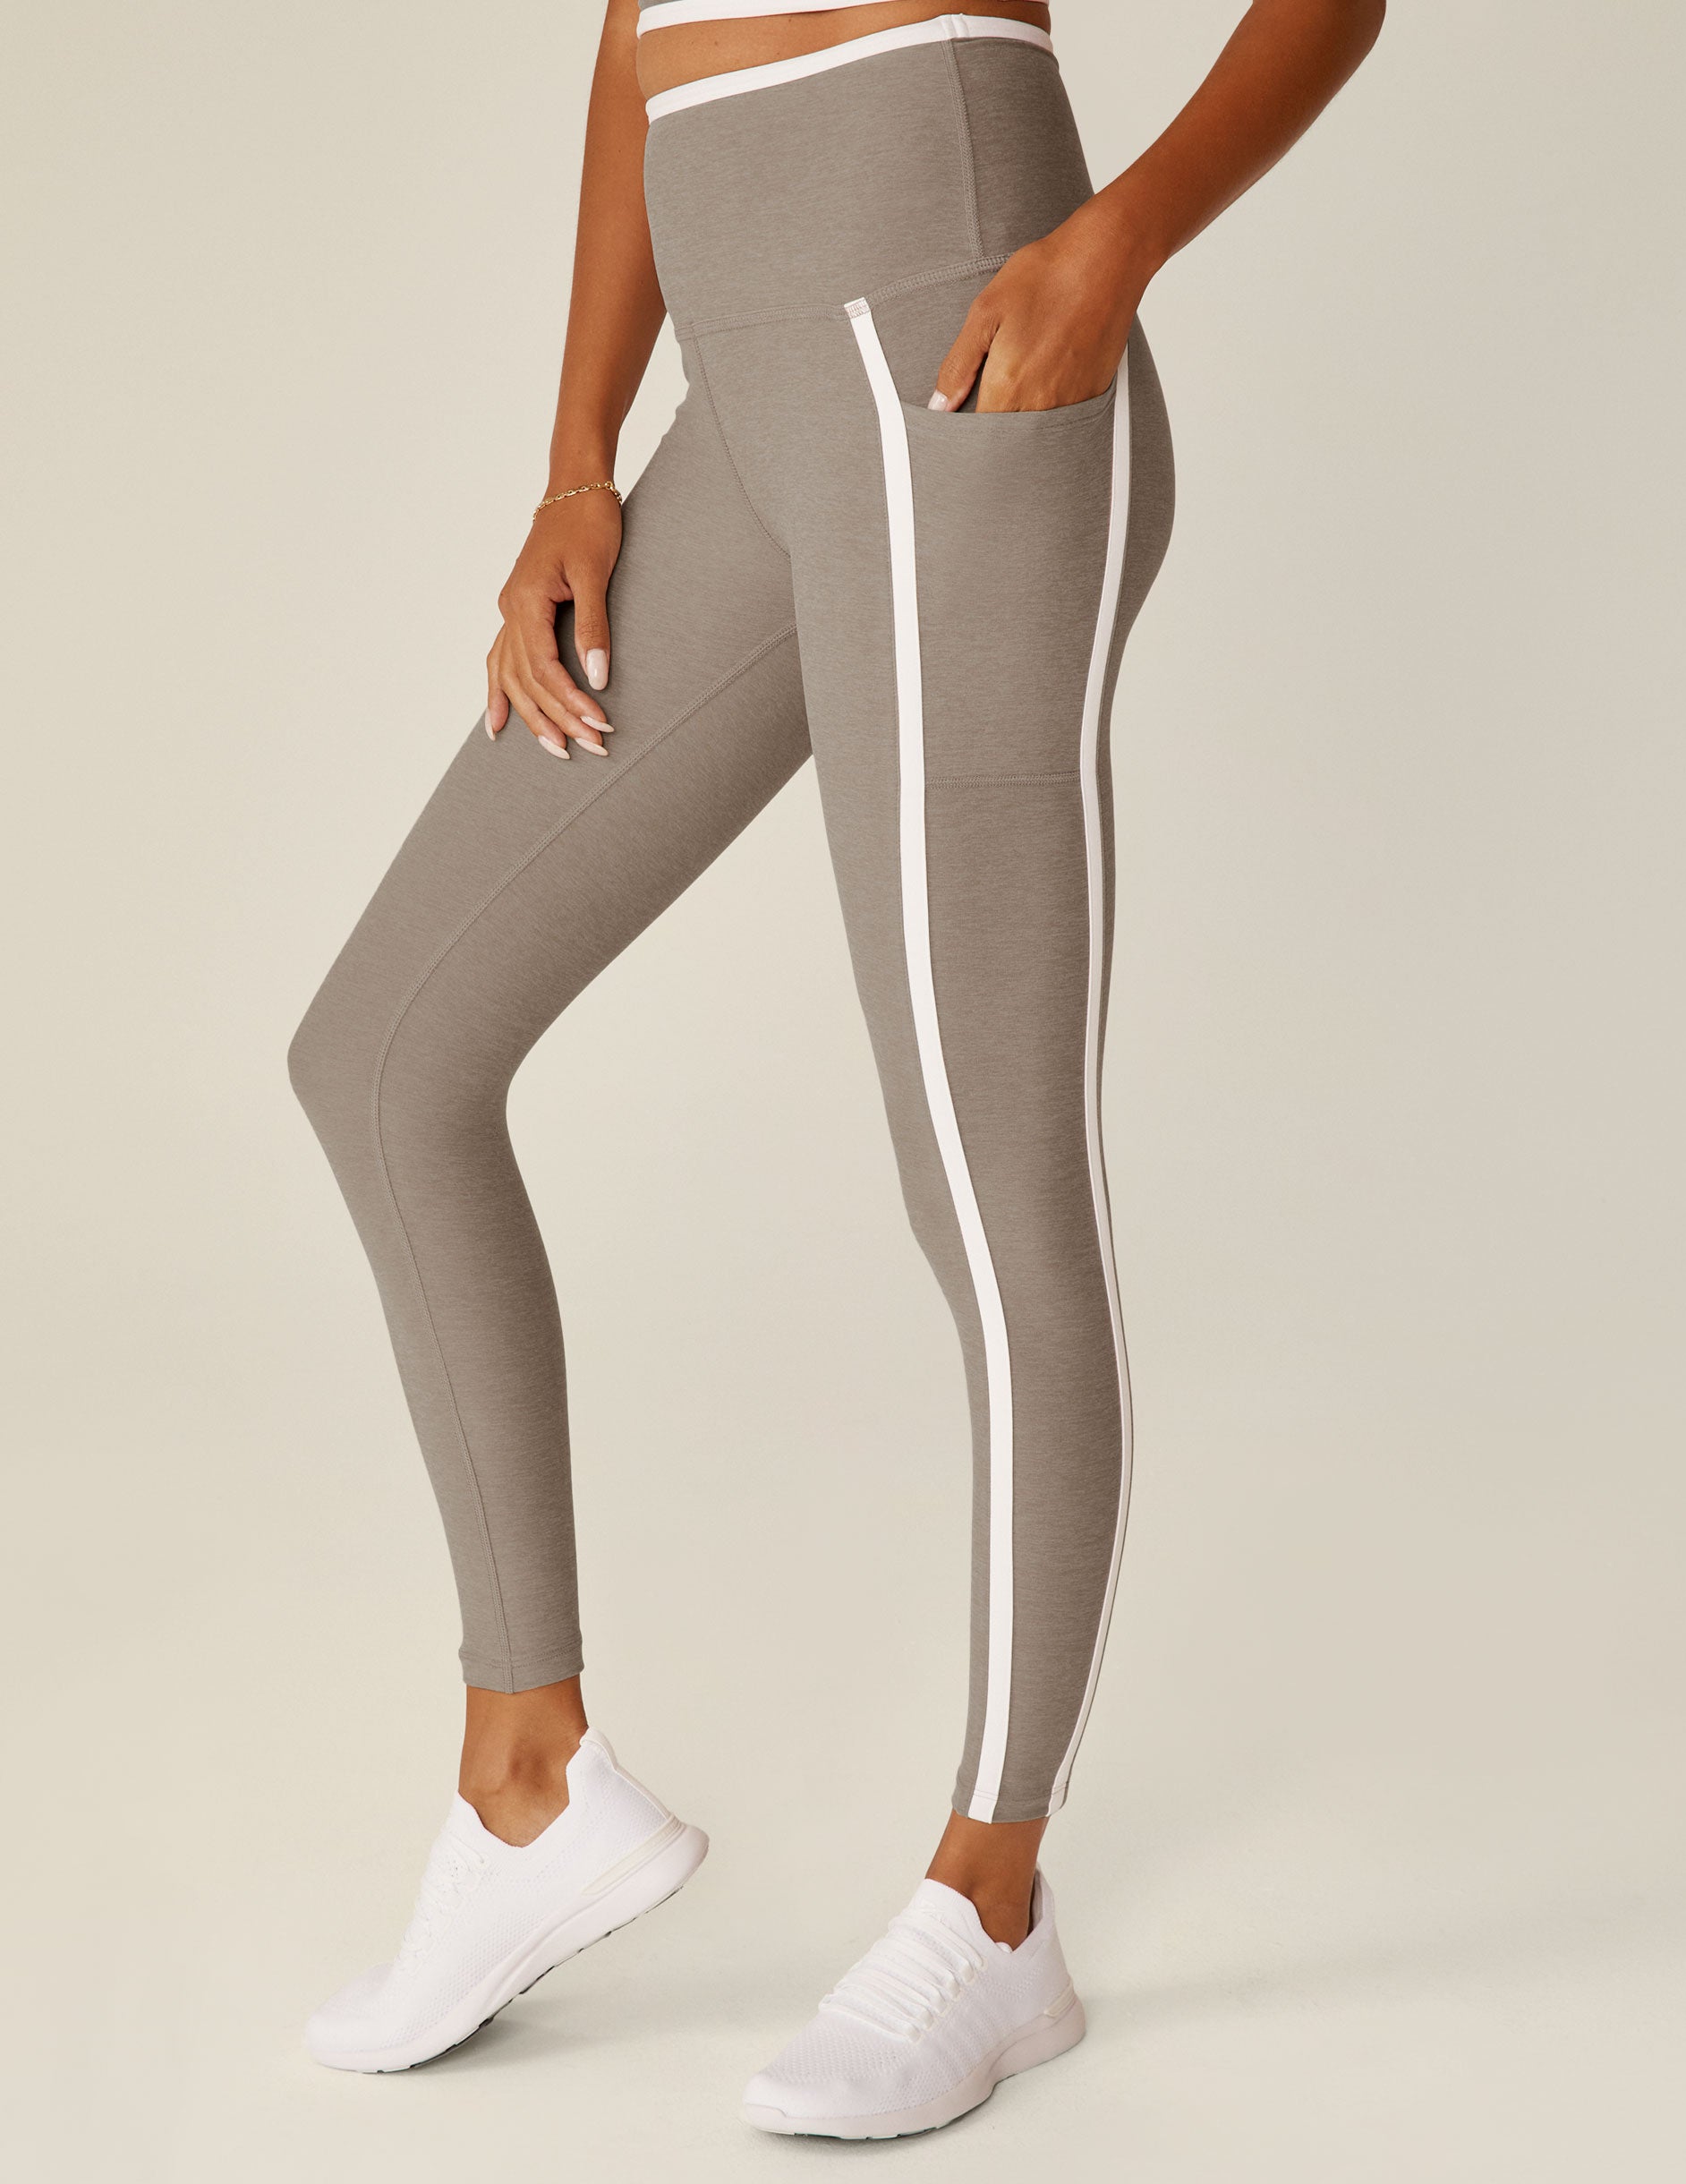 brown high-waisted pocket midi leggings with white line detailing around waistband and down the sides. 